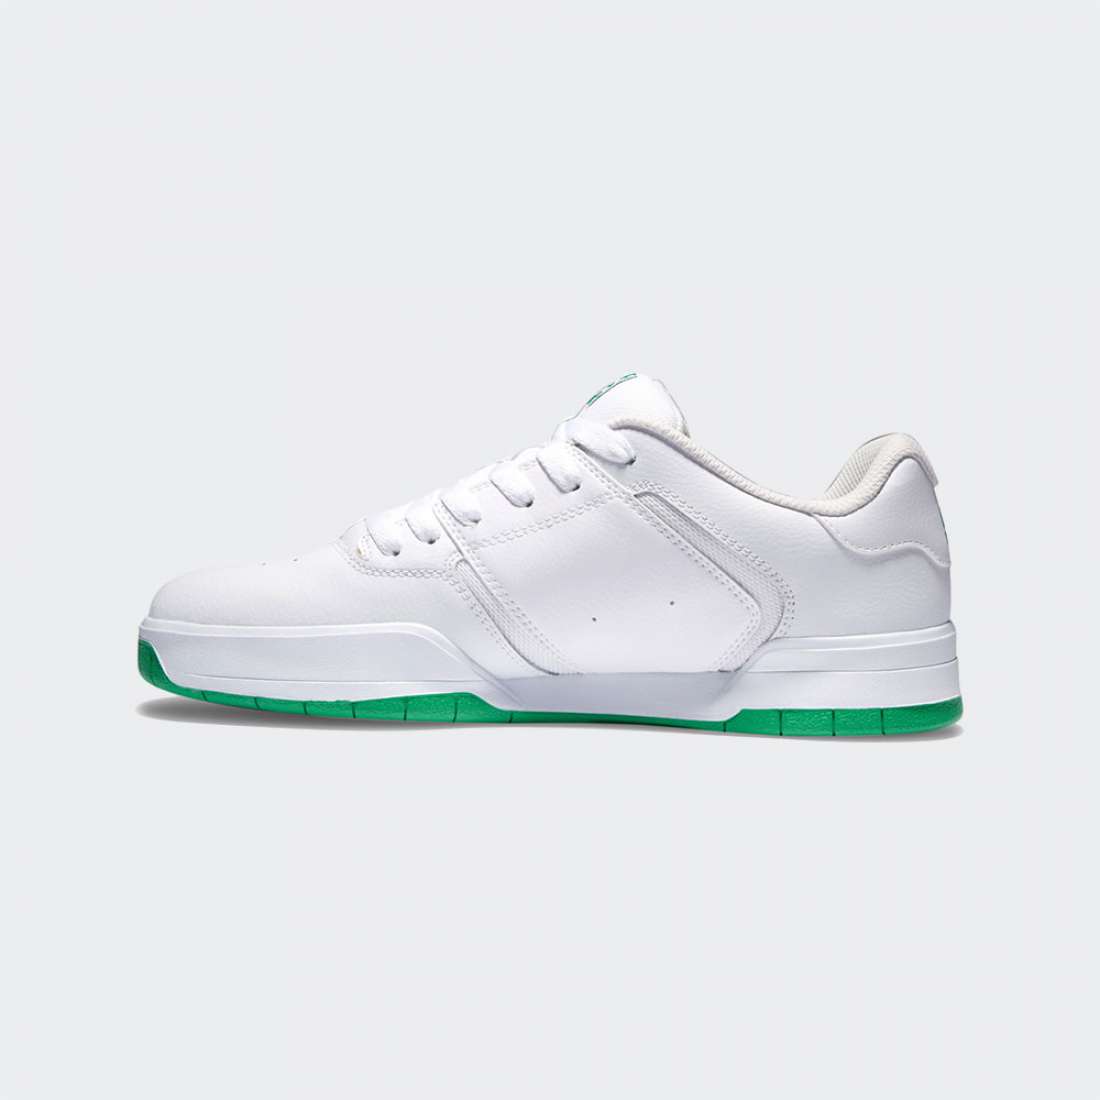 DC CENTRAL WHITE/GREEN